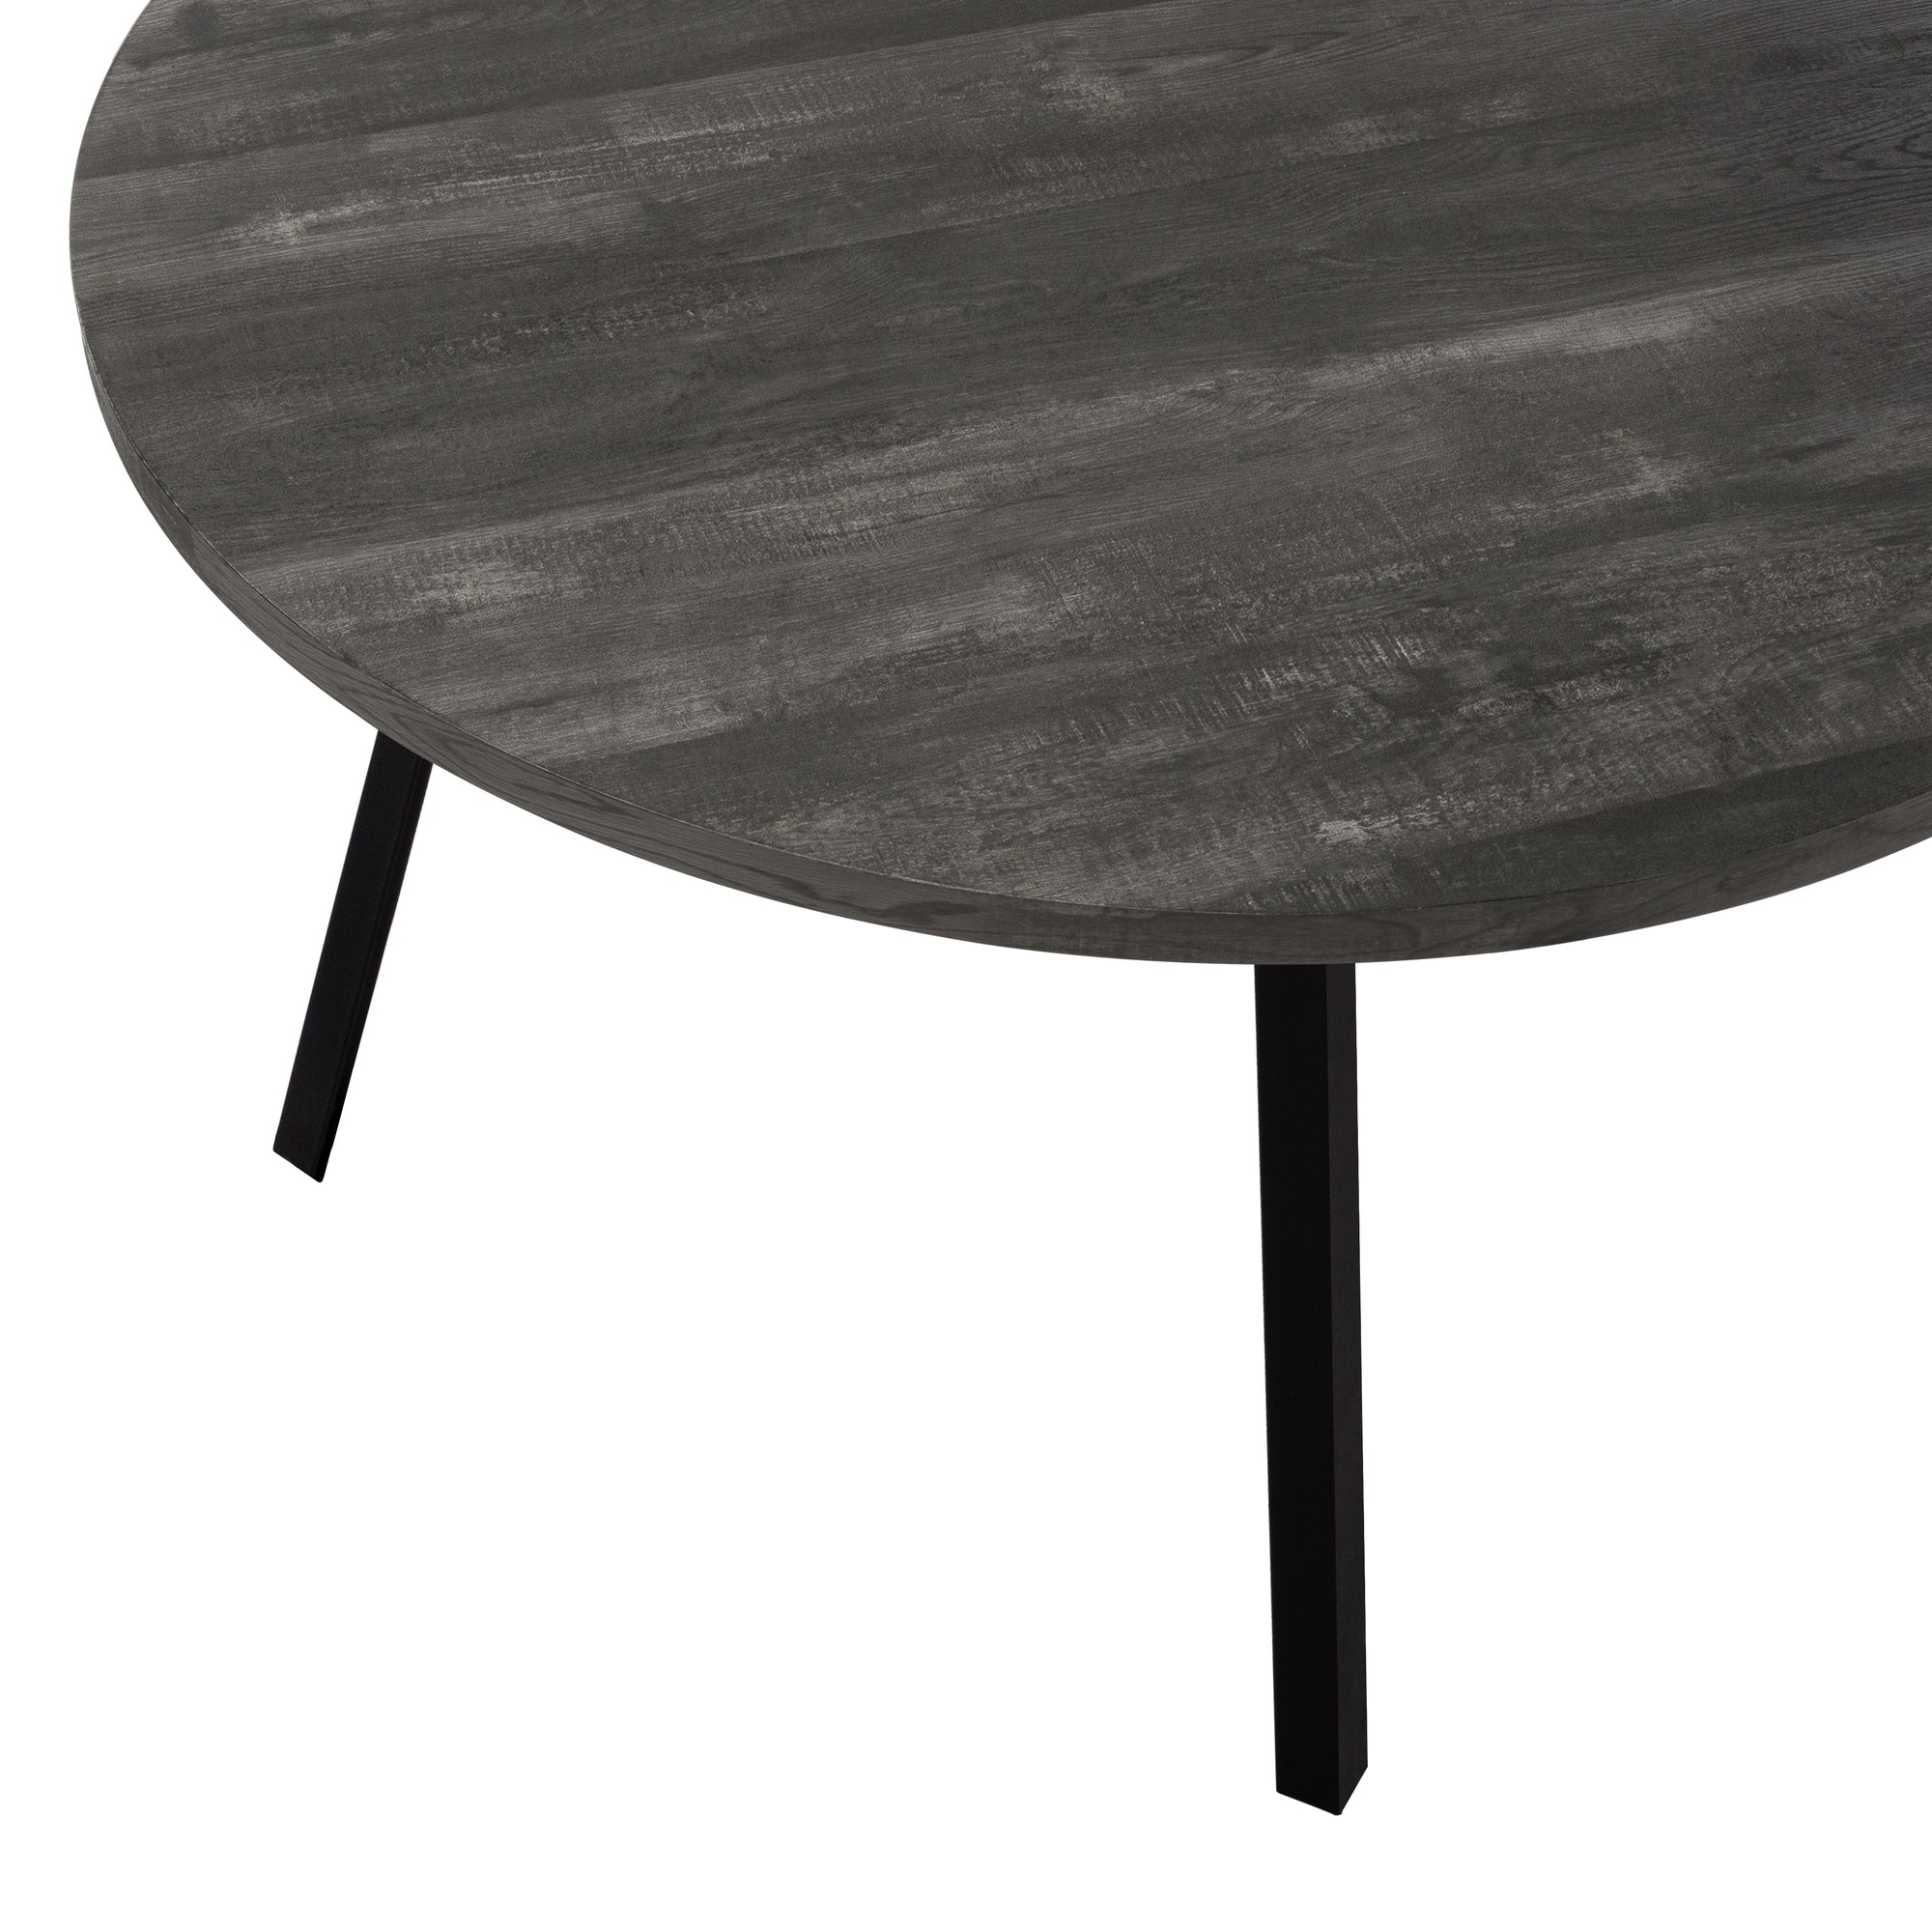 MN-701153    Dining Table, 48" Round, Metal, Kitchen, Dining Room, Metal Legs, Laminate, Black Reclaimed Wood Look, Black, Contemporary, Industrial, Modern